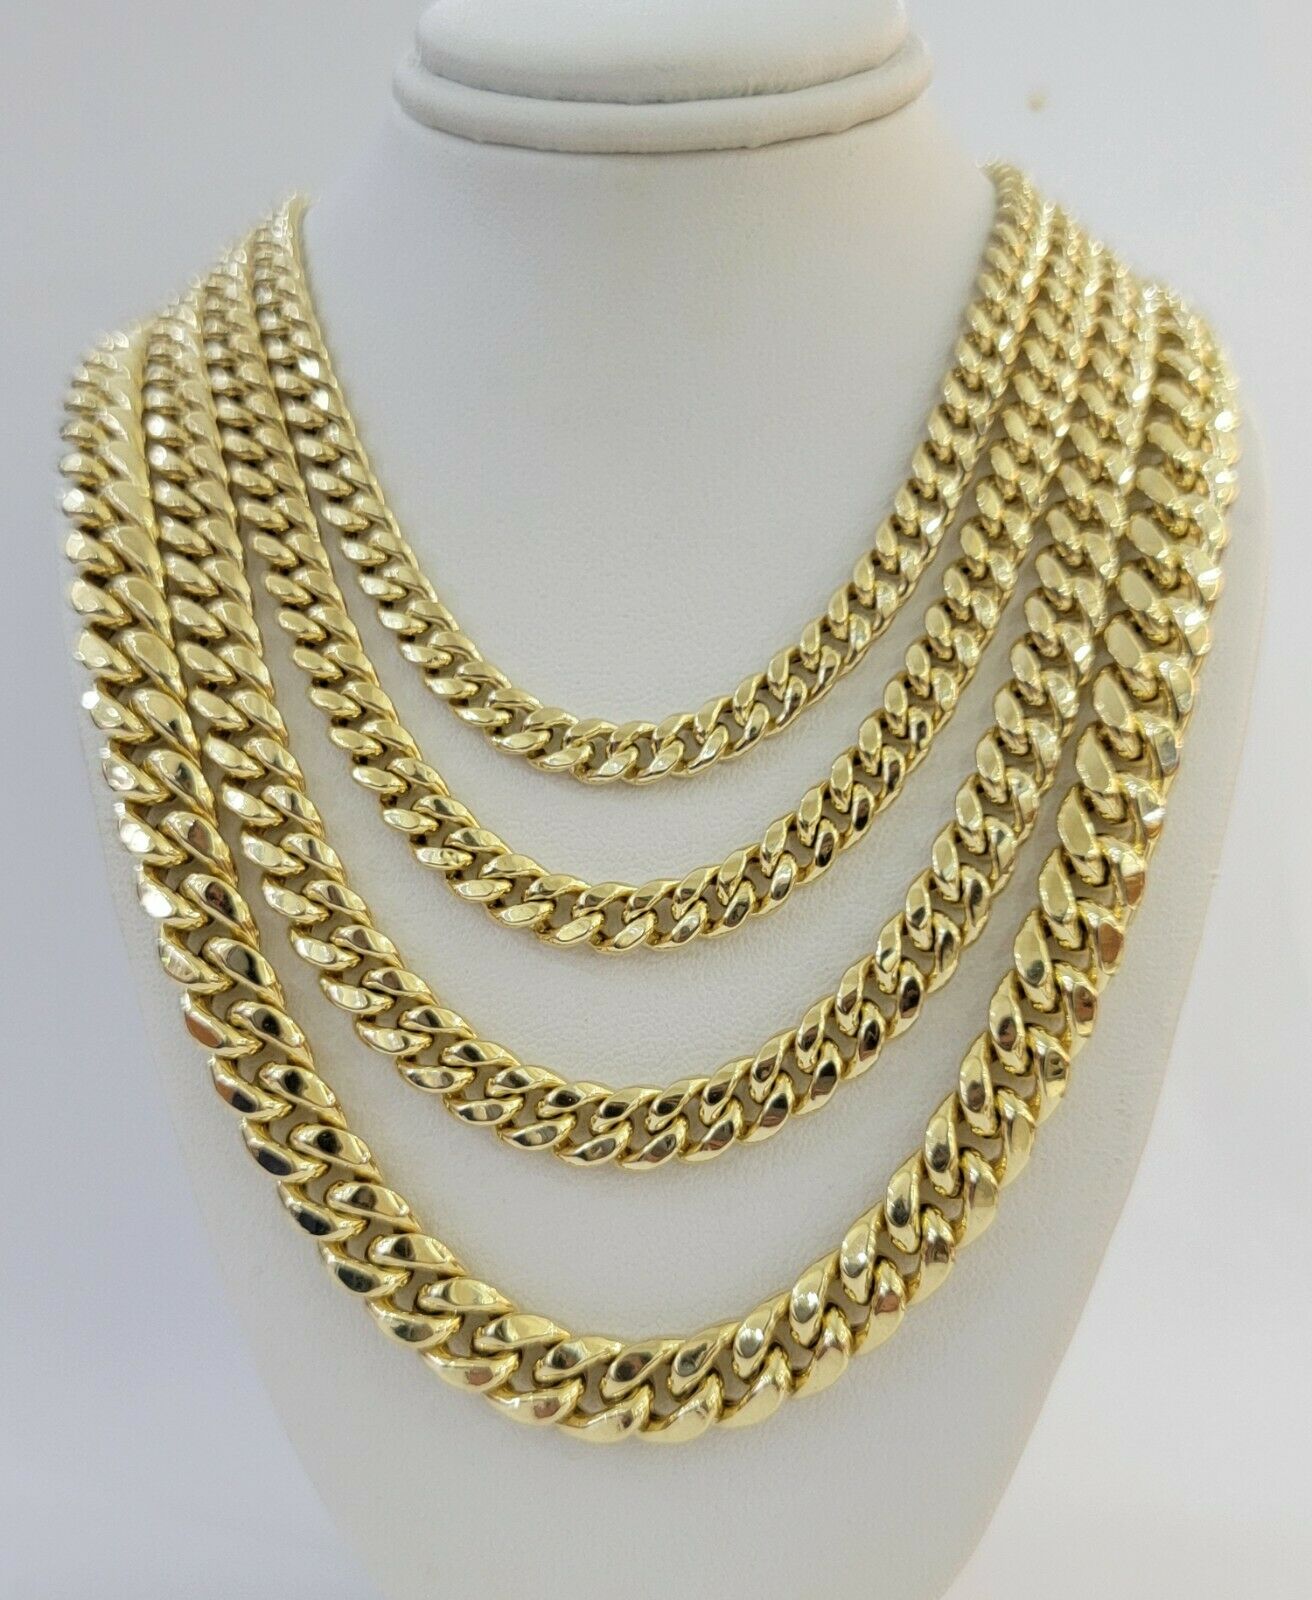 Real 14k Yellow Gold chain Miami Cuban Link Necklace 6mm-9mm 8